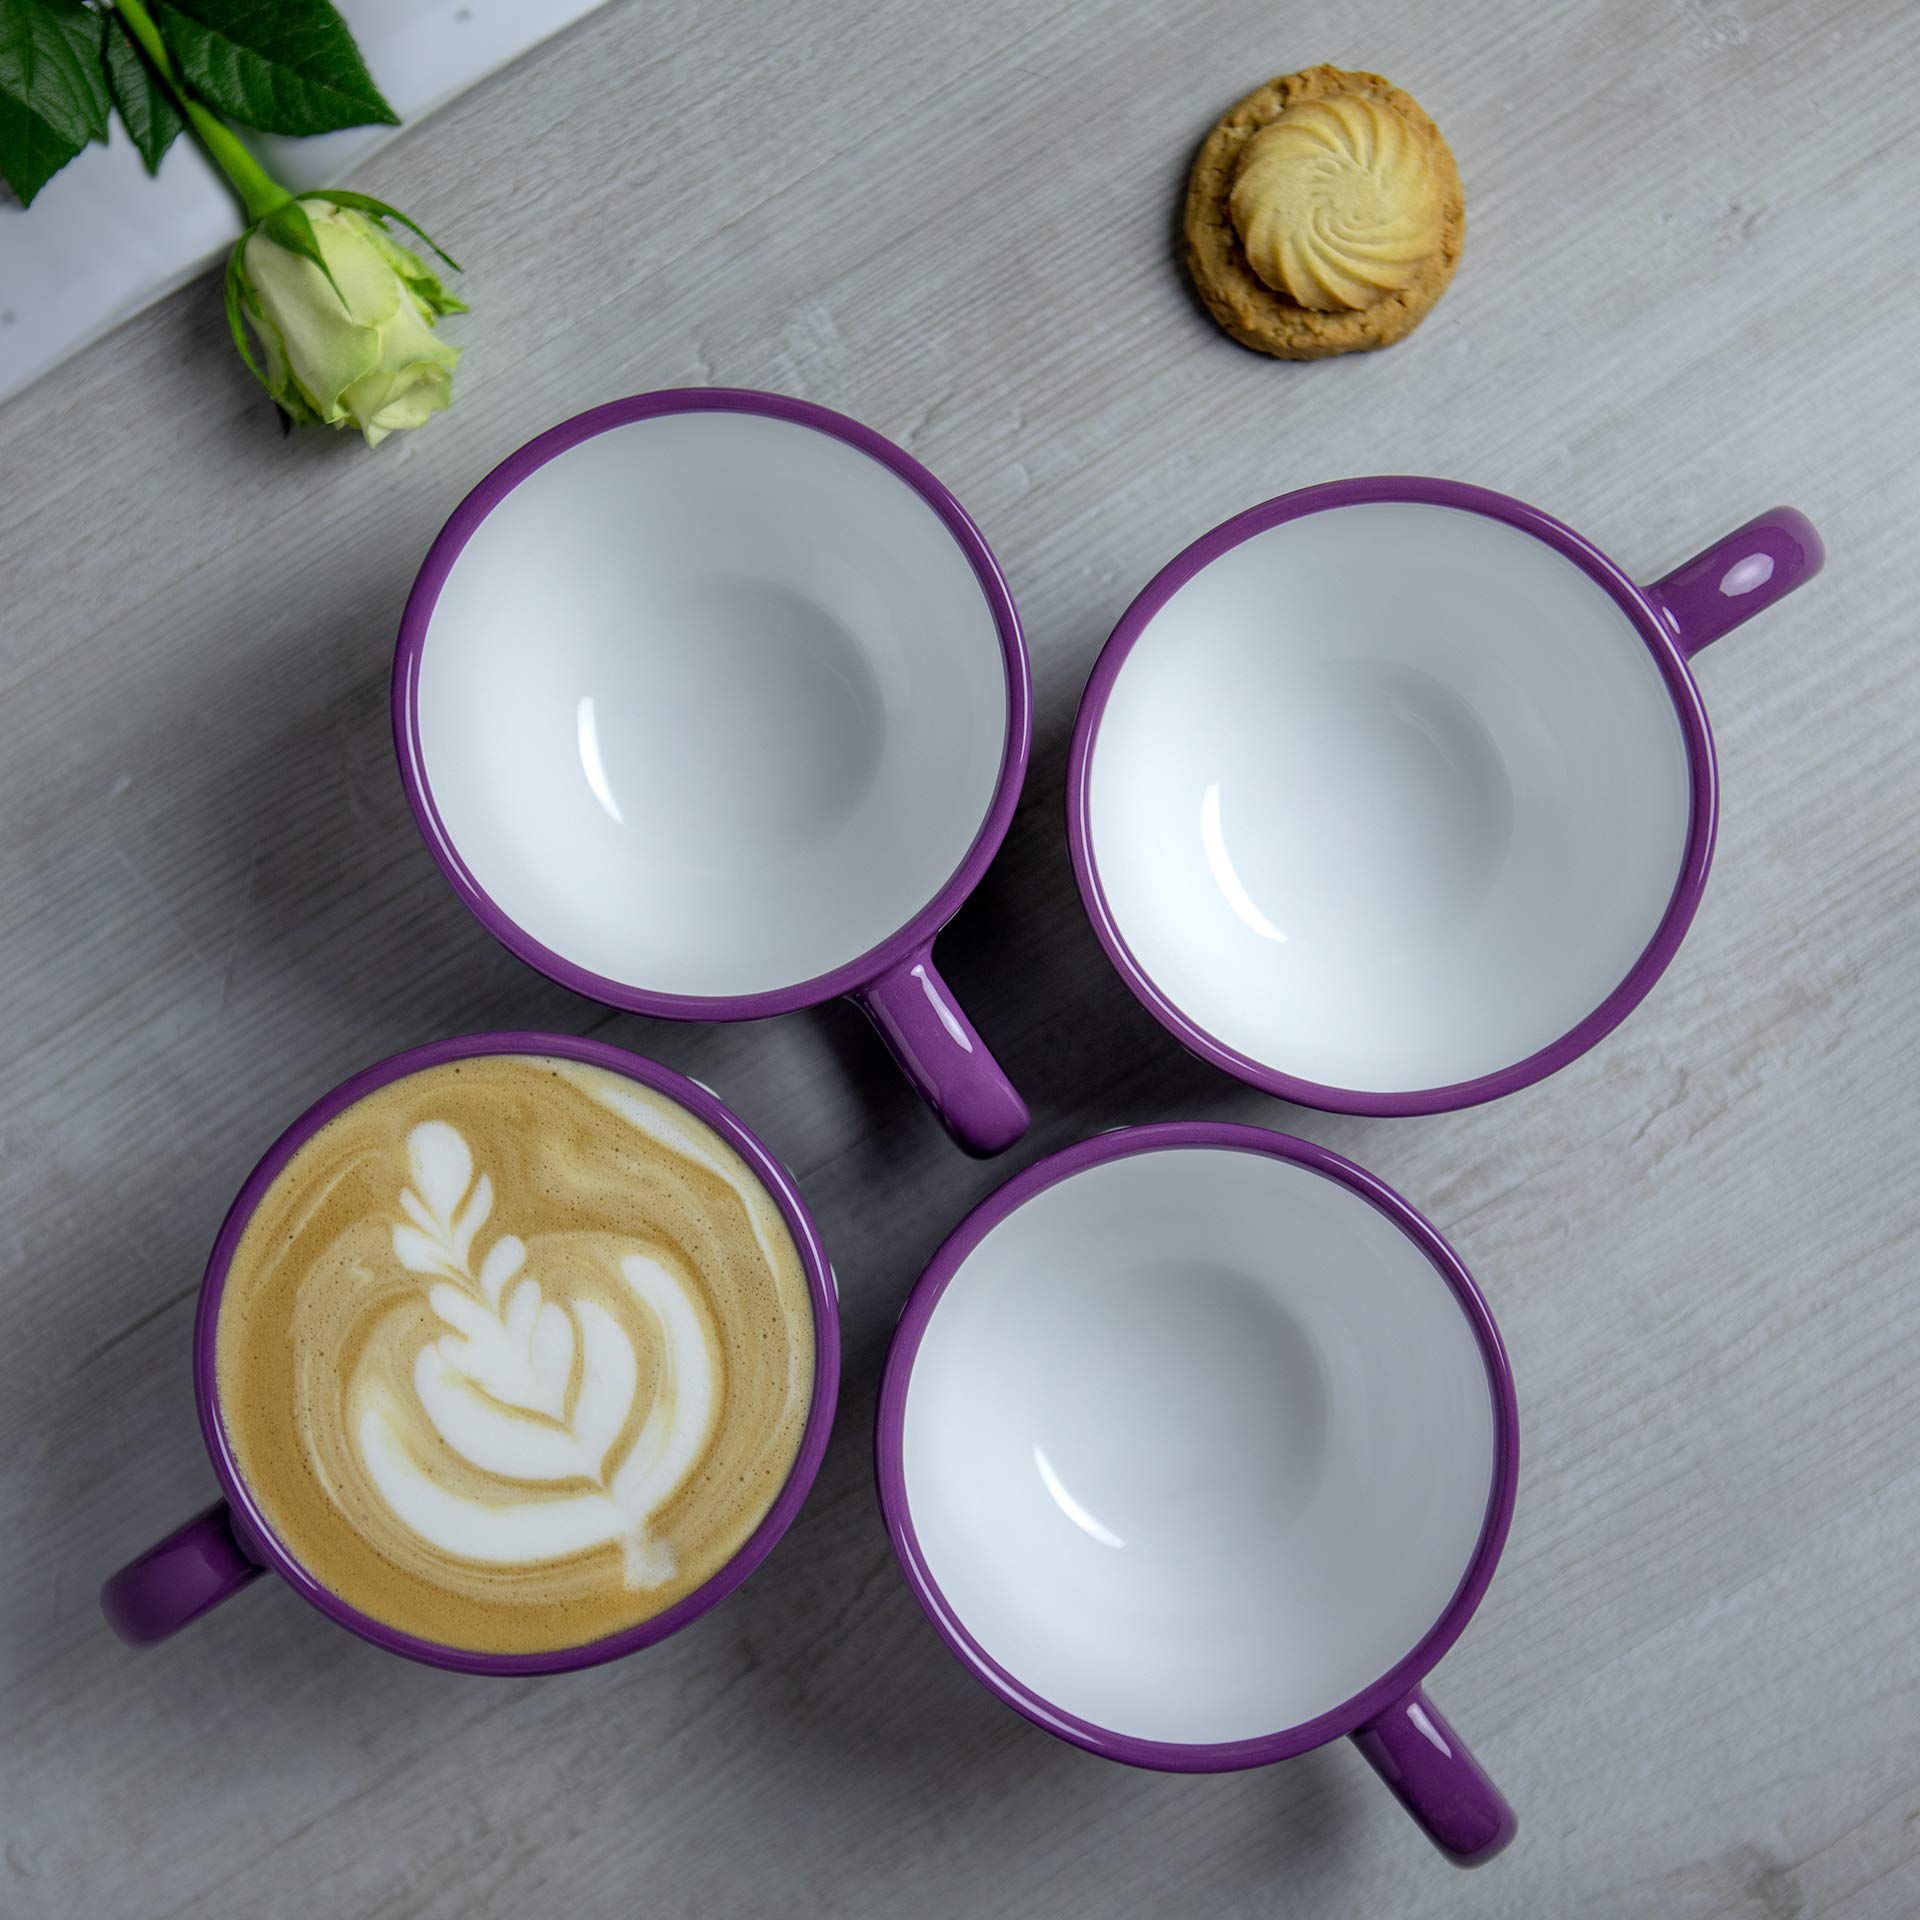 City to Cottage Handmade Ceramic Designer Purple and White Polka Dot Cup, Unique Extra Large 17.5oz/500ml Pottery Cappuccino, Coffee, Tea, Soup Mug | Housewarming Gift for Tea Lovers